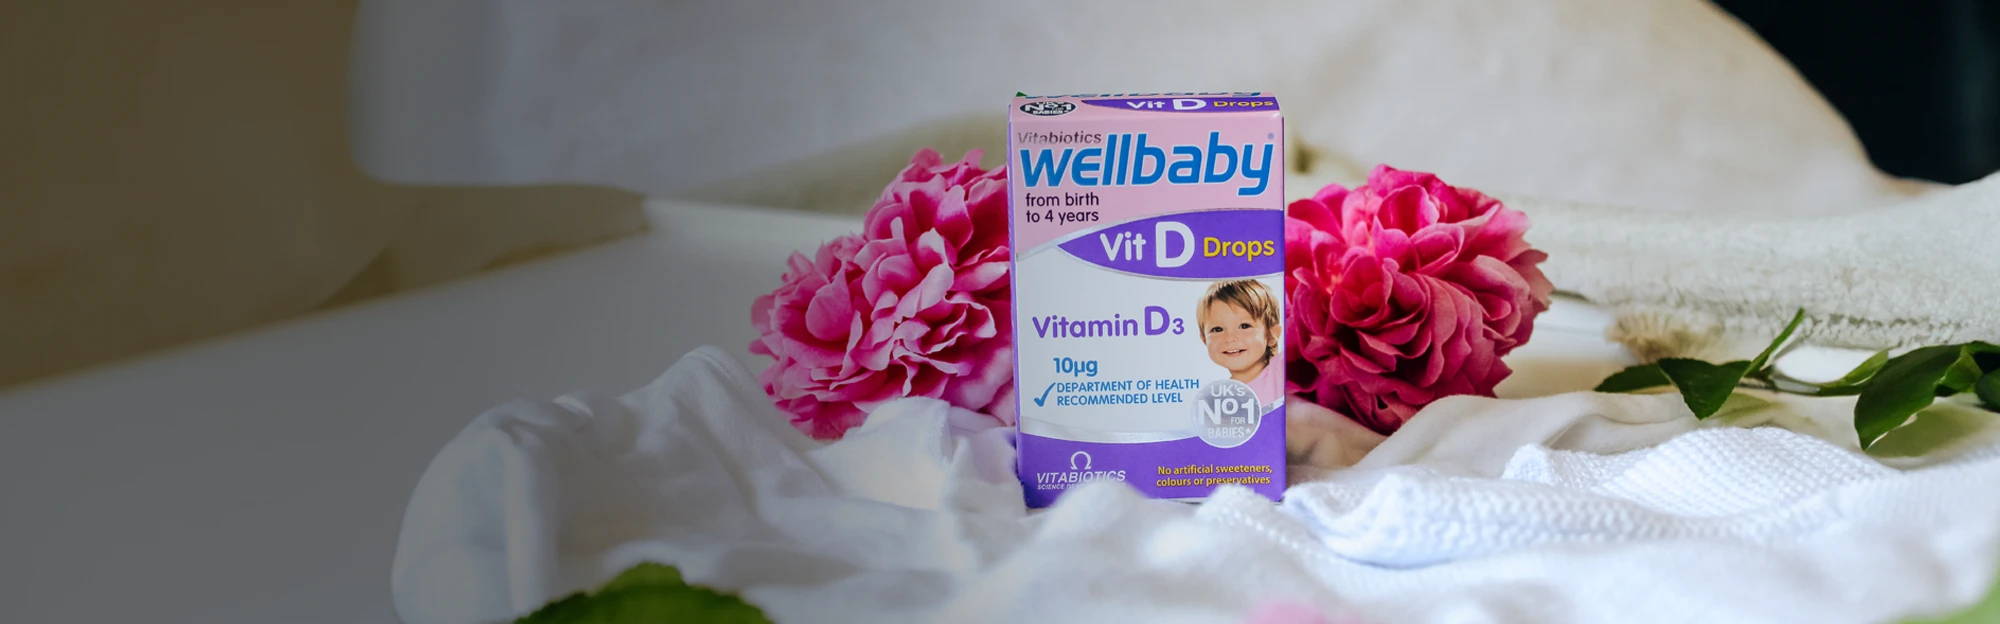  Getting Vitamin D into your baby’s diet isn’t always a fairy tale. But with Wellbaby Vitamin D Drops, we’ve taken a leaf out of Goldilocks’ book – not too much, not too little, just the right amount of Vitamin D as recommended by the UK Department of Health. 